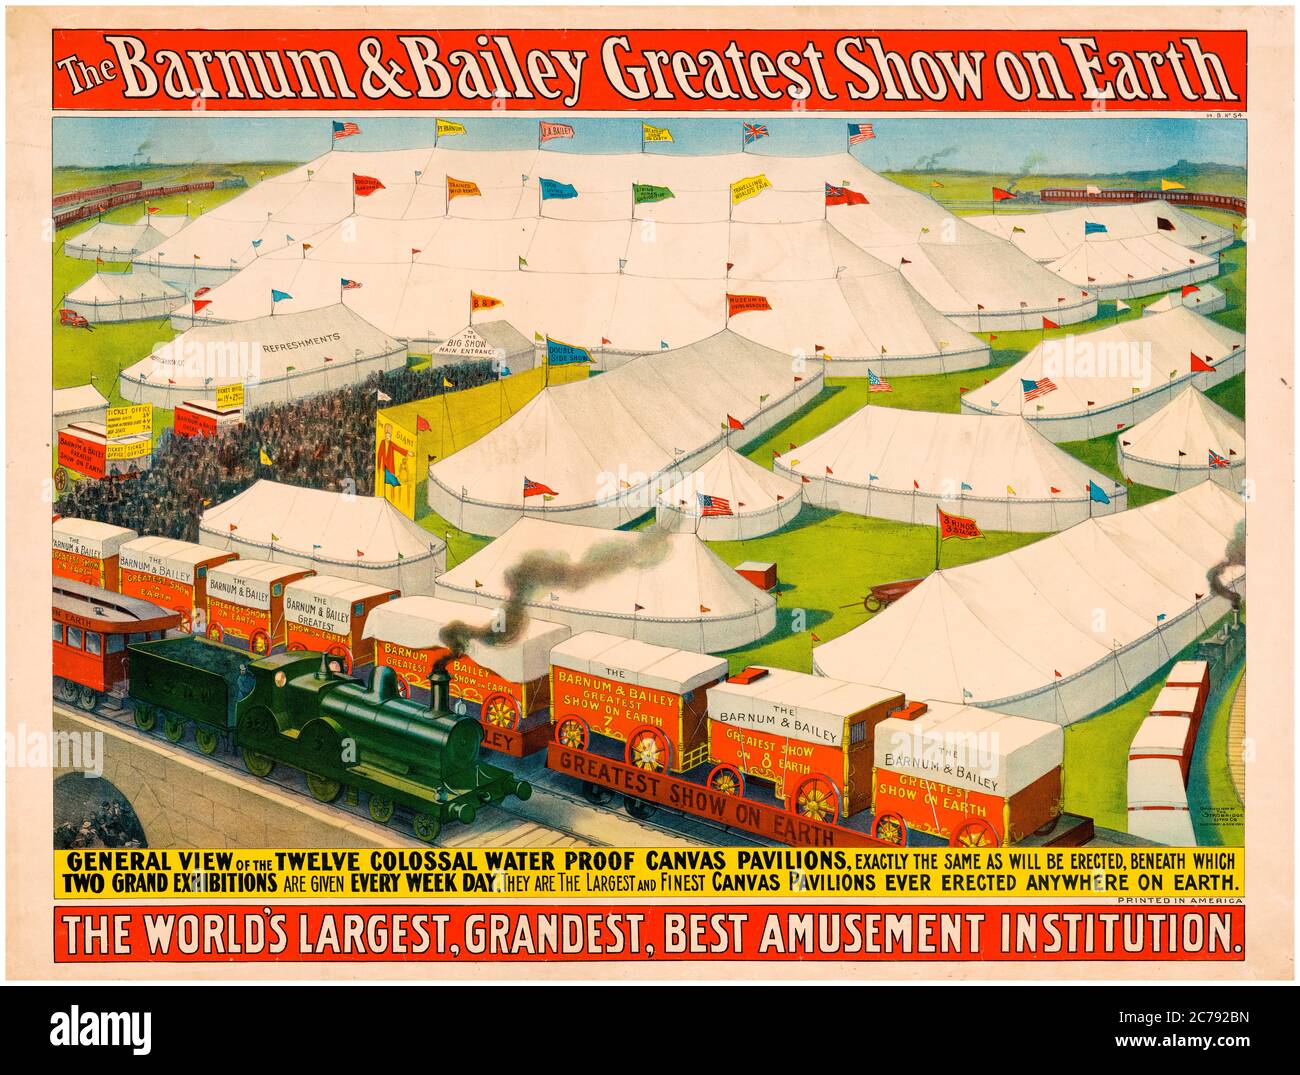 L'affiche Barnum & Bailey Greatest Show on Earth, vers 1899 Banque D'Images